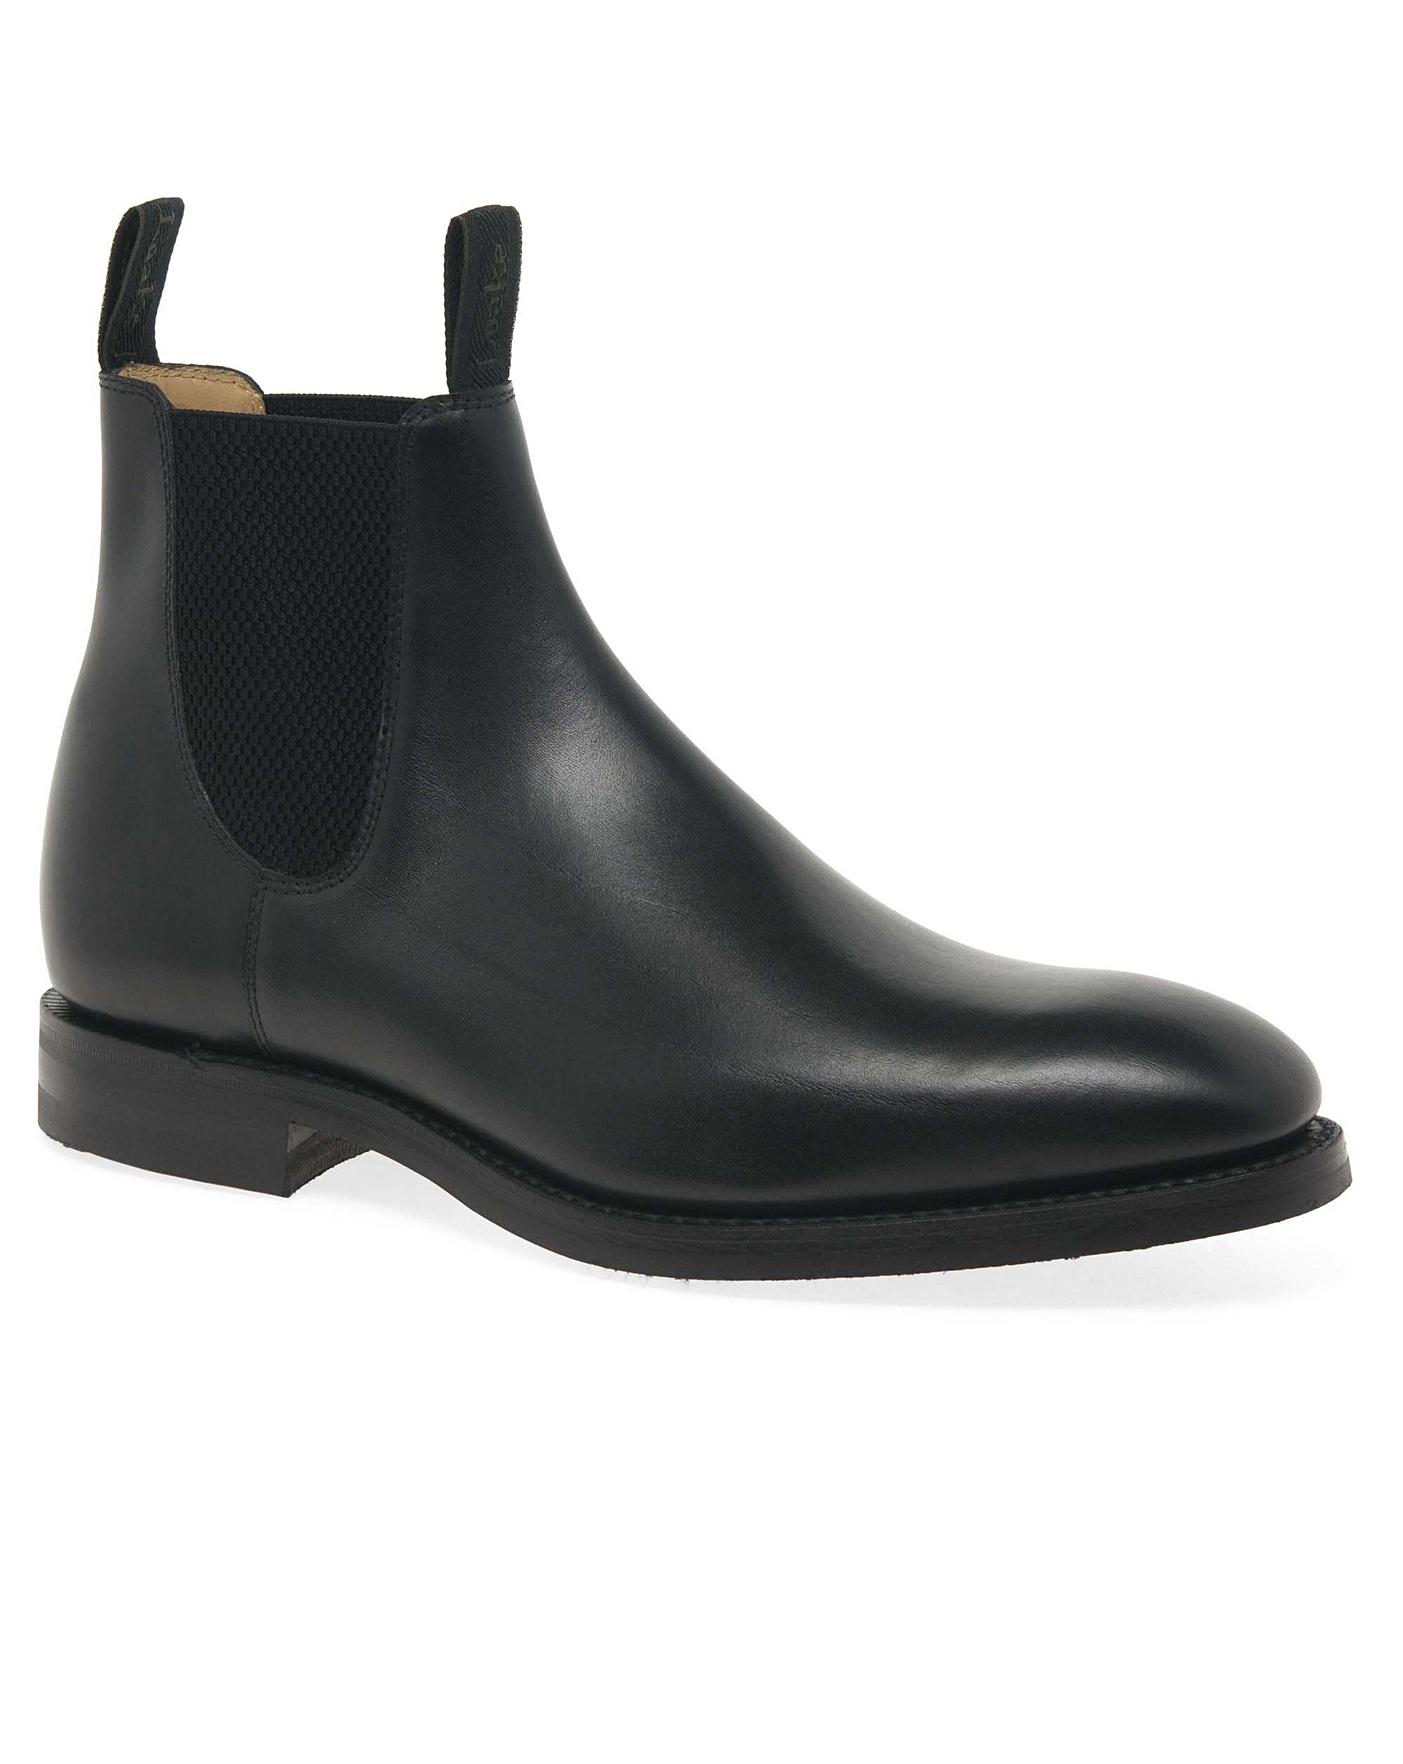 mens wide leather boots